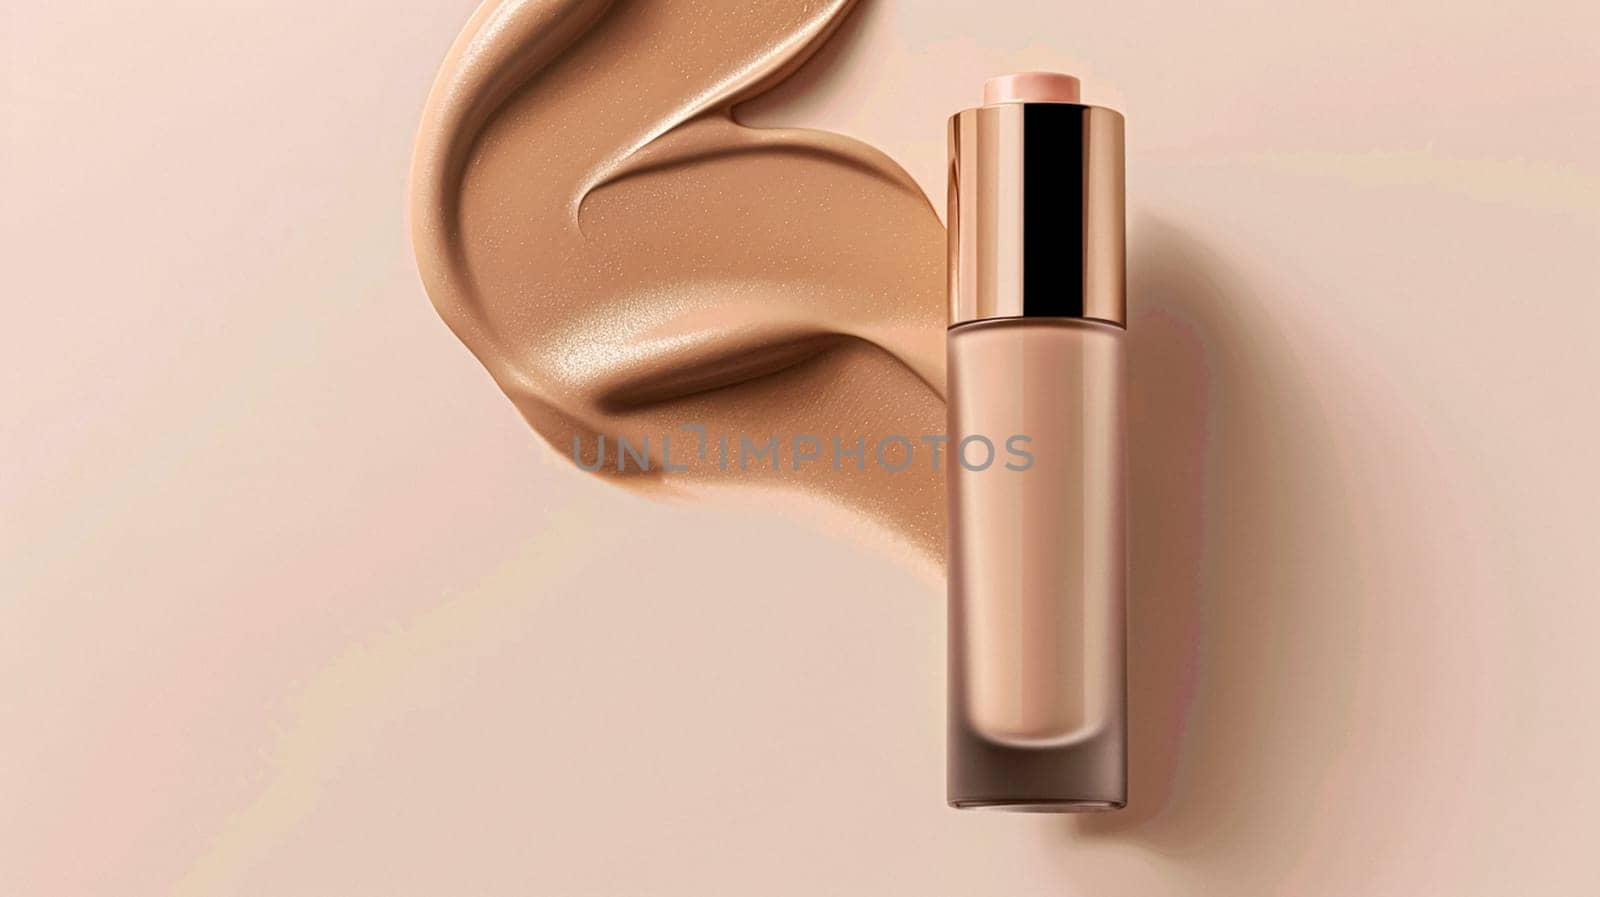 Make-up foundation cosmetics product, beige cosmetic makeup and skincare cream sample as luxury beauty brand design by Anneleven